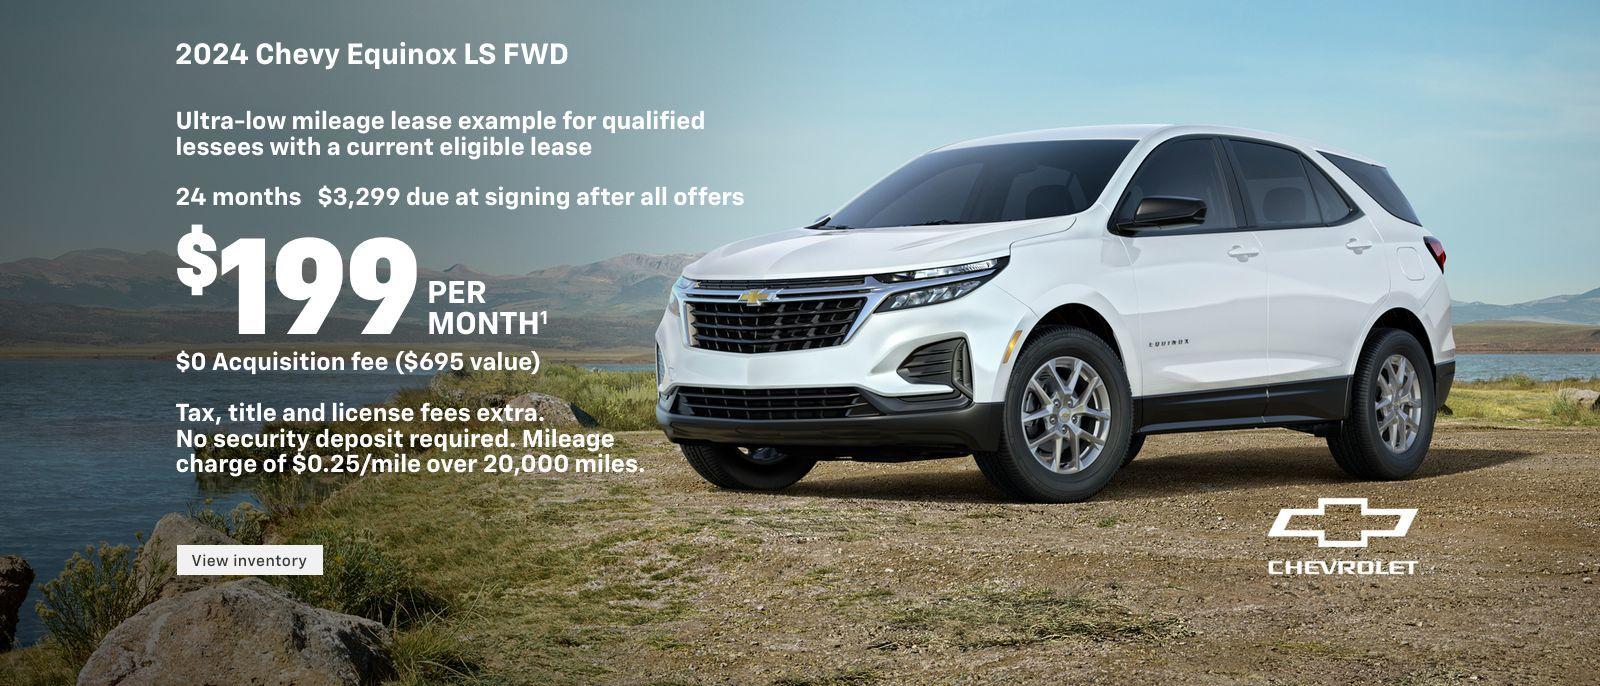 2024 Chevy Equinox LS FWD. Ultra-low mileage lease example for qualified lessees with a current eligible lease. $199 per month. 24 months. $3,299 due at signing after all offers. $0 Acquisition fee ($695 value). Tax, title and license fees extra. No security deposit required. Mileage charge of $0.25/mile over 20,000 miles.